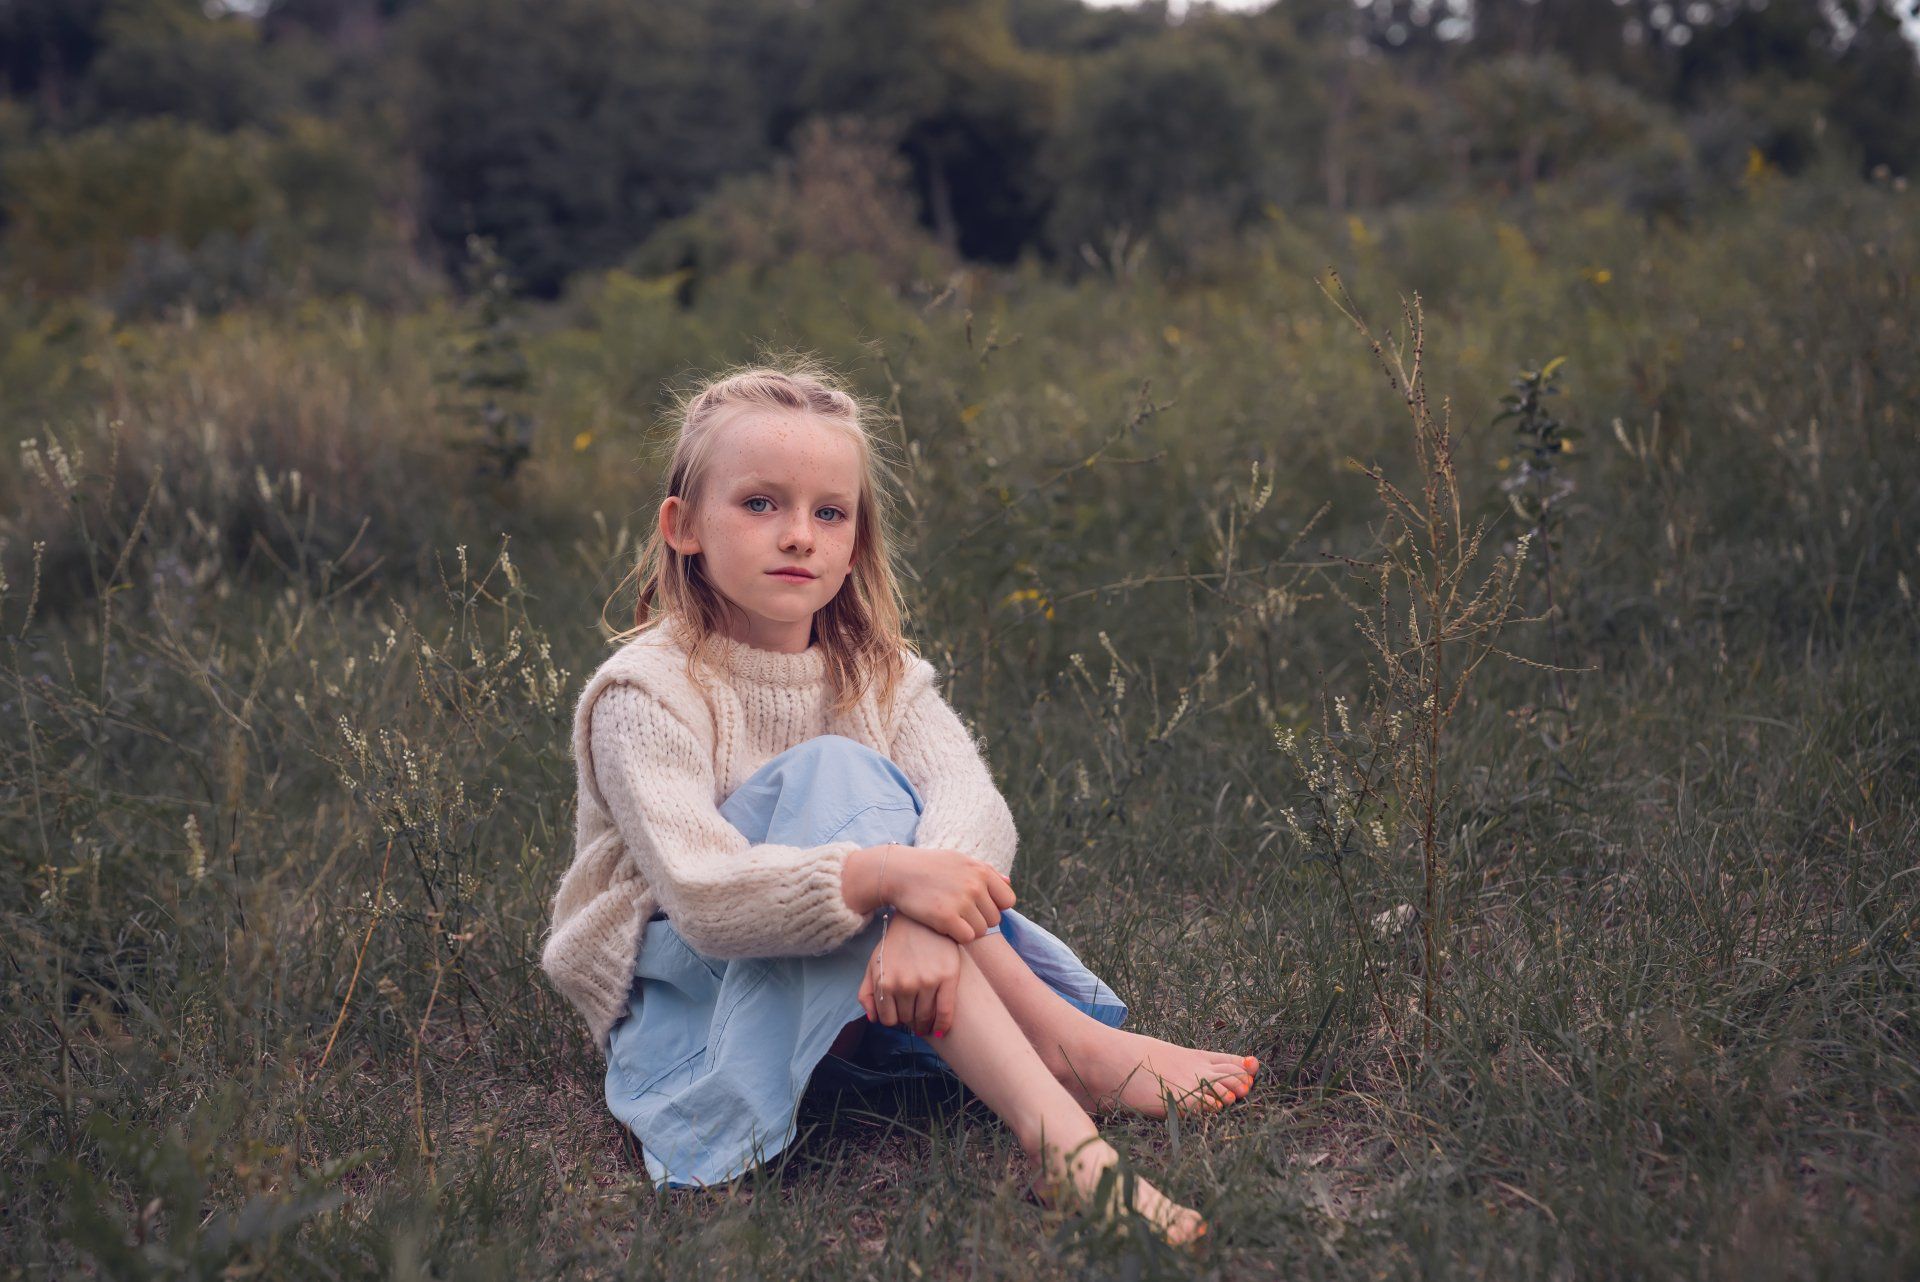 young girl with blonde hair sitting in a grassy field